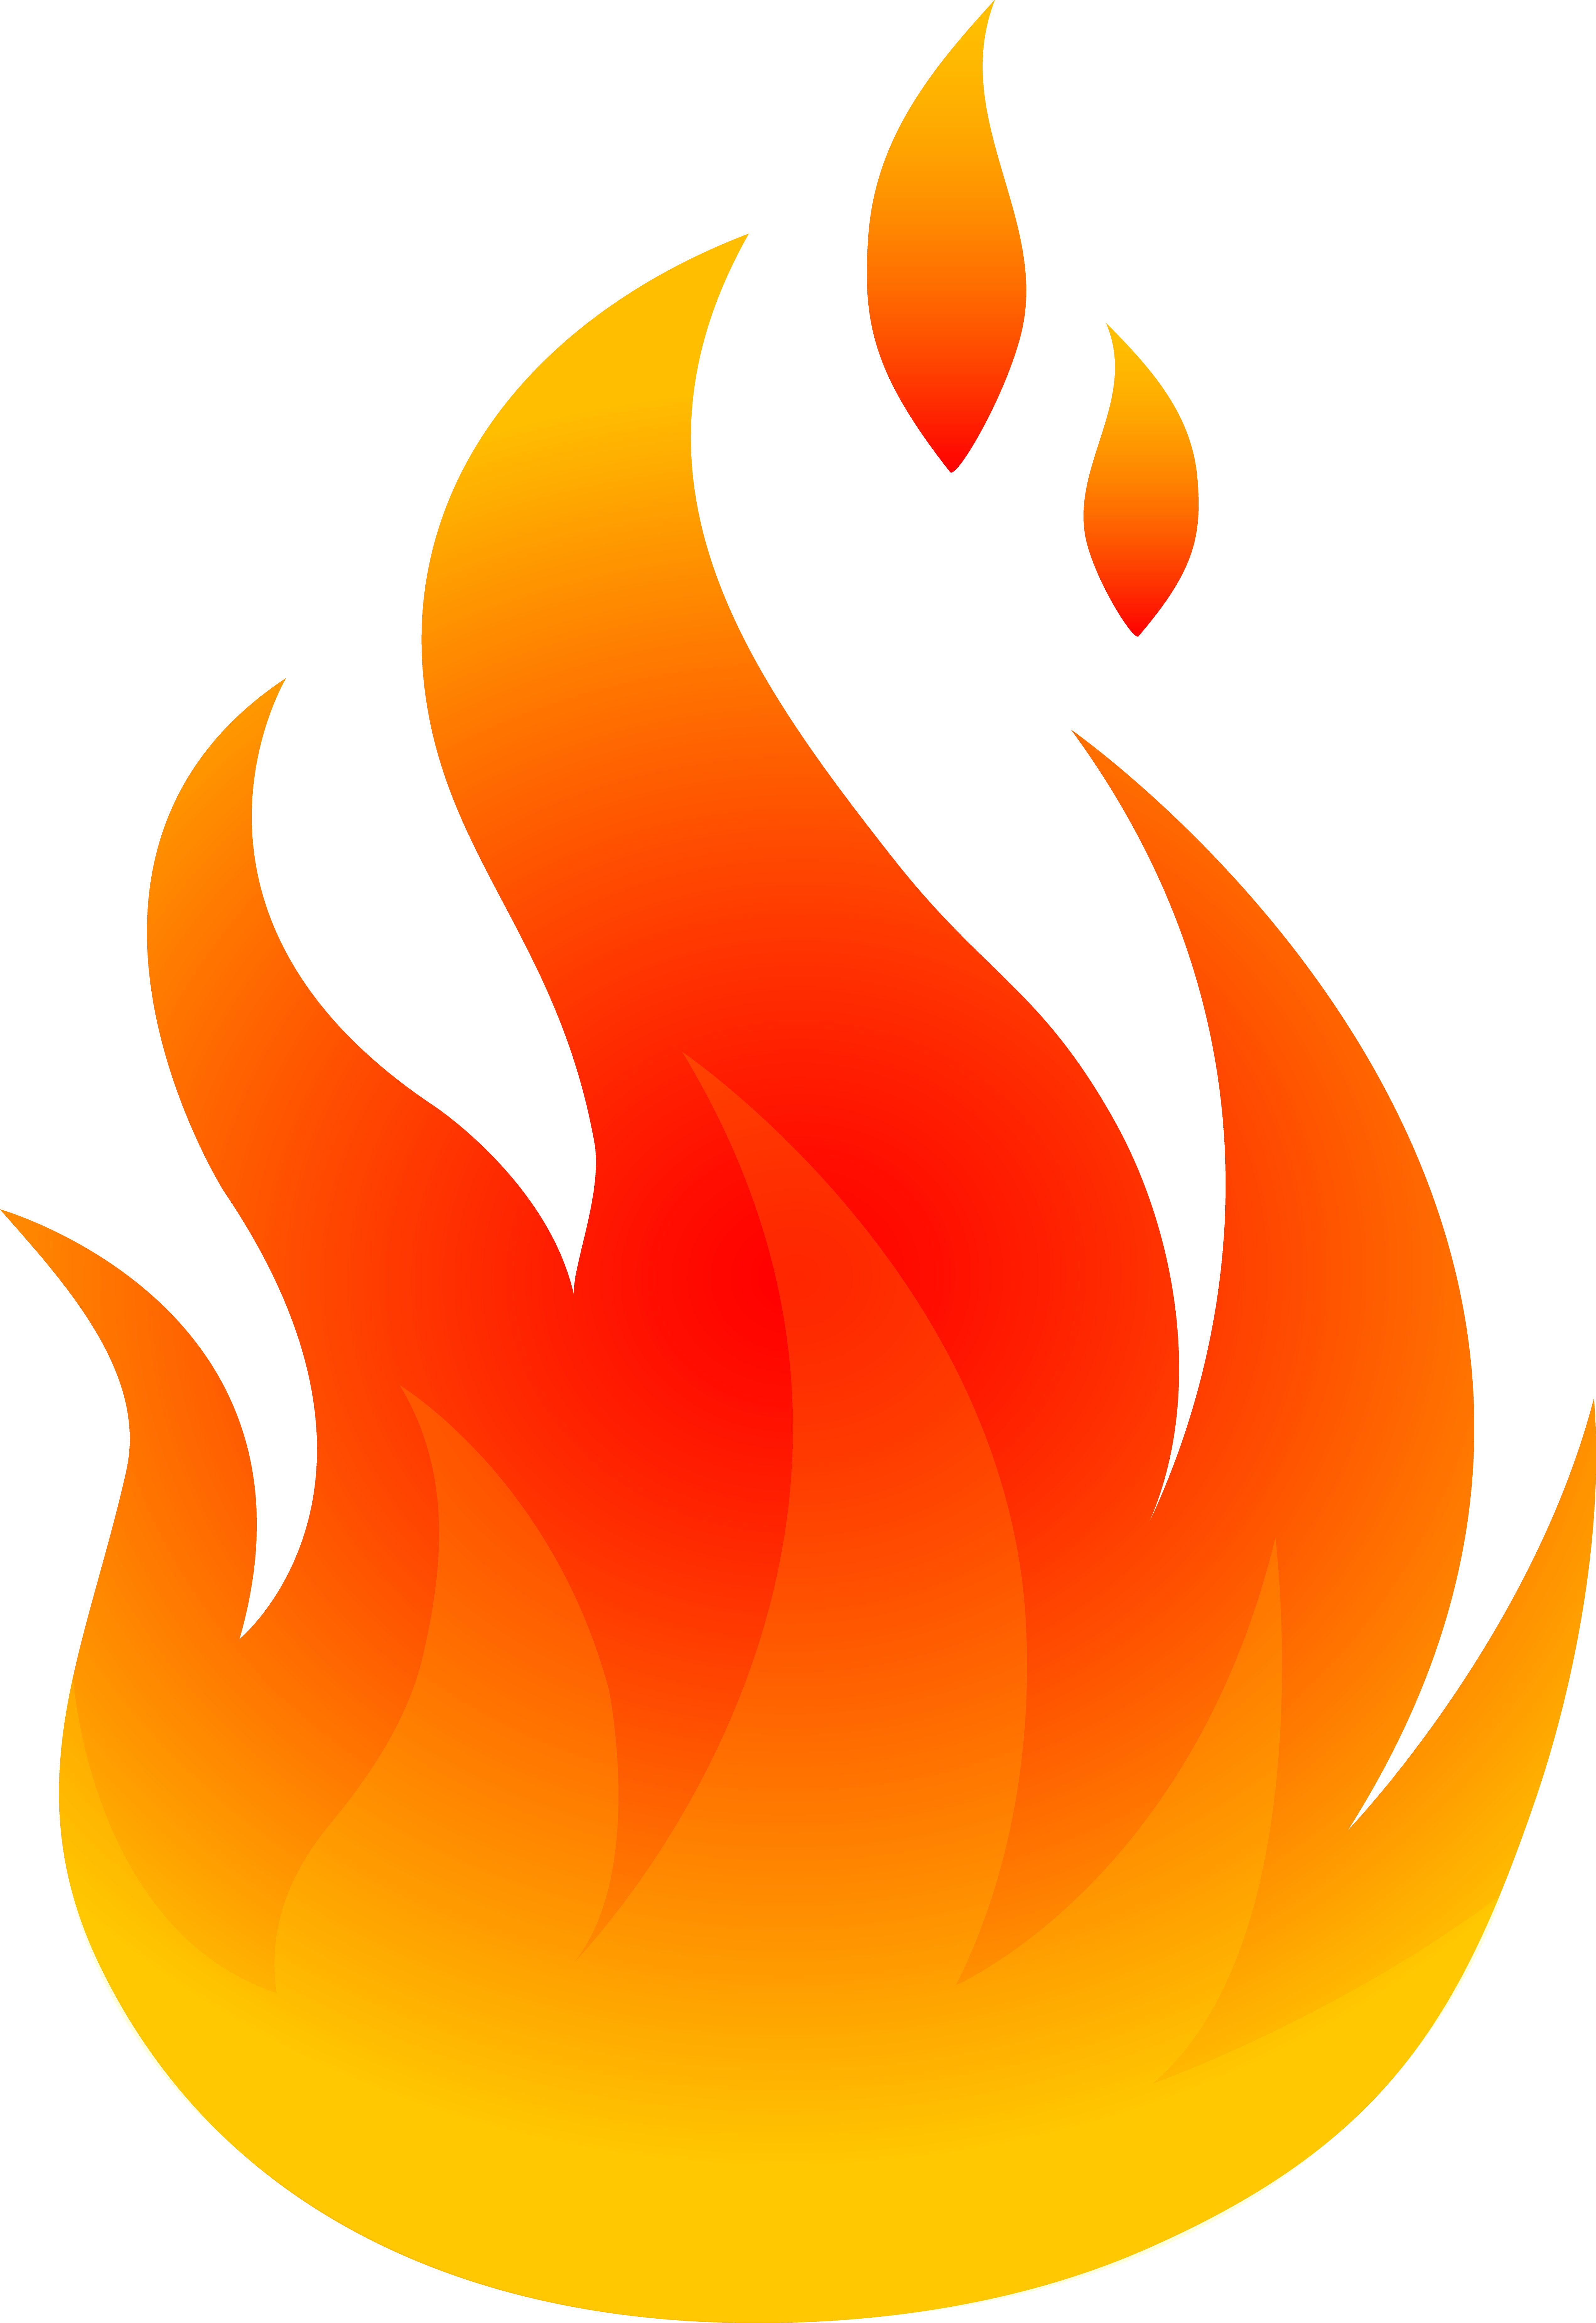 Fire Flames Art Clip art | Clipart library - Free Clipart Images